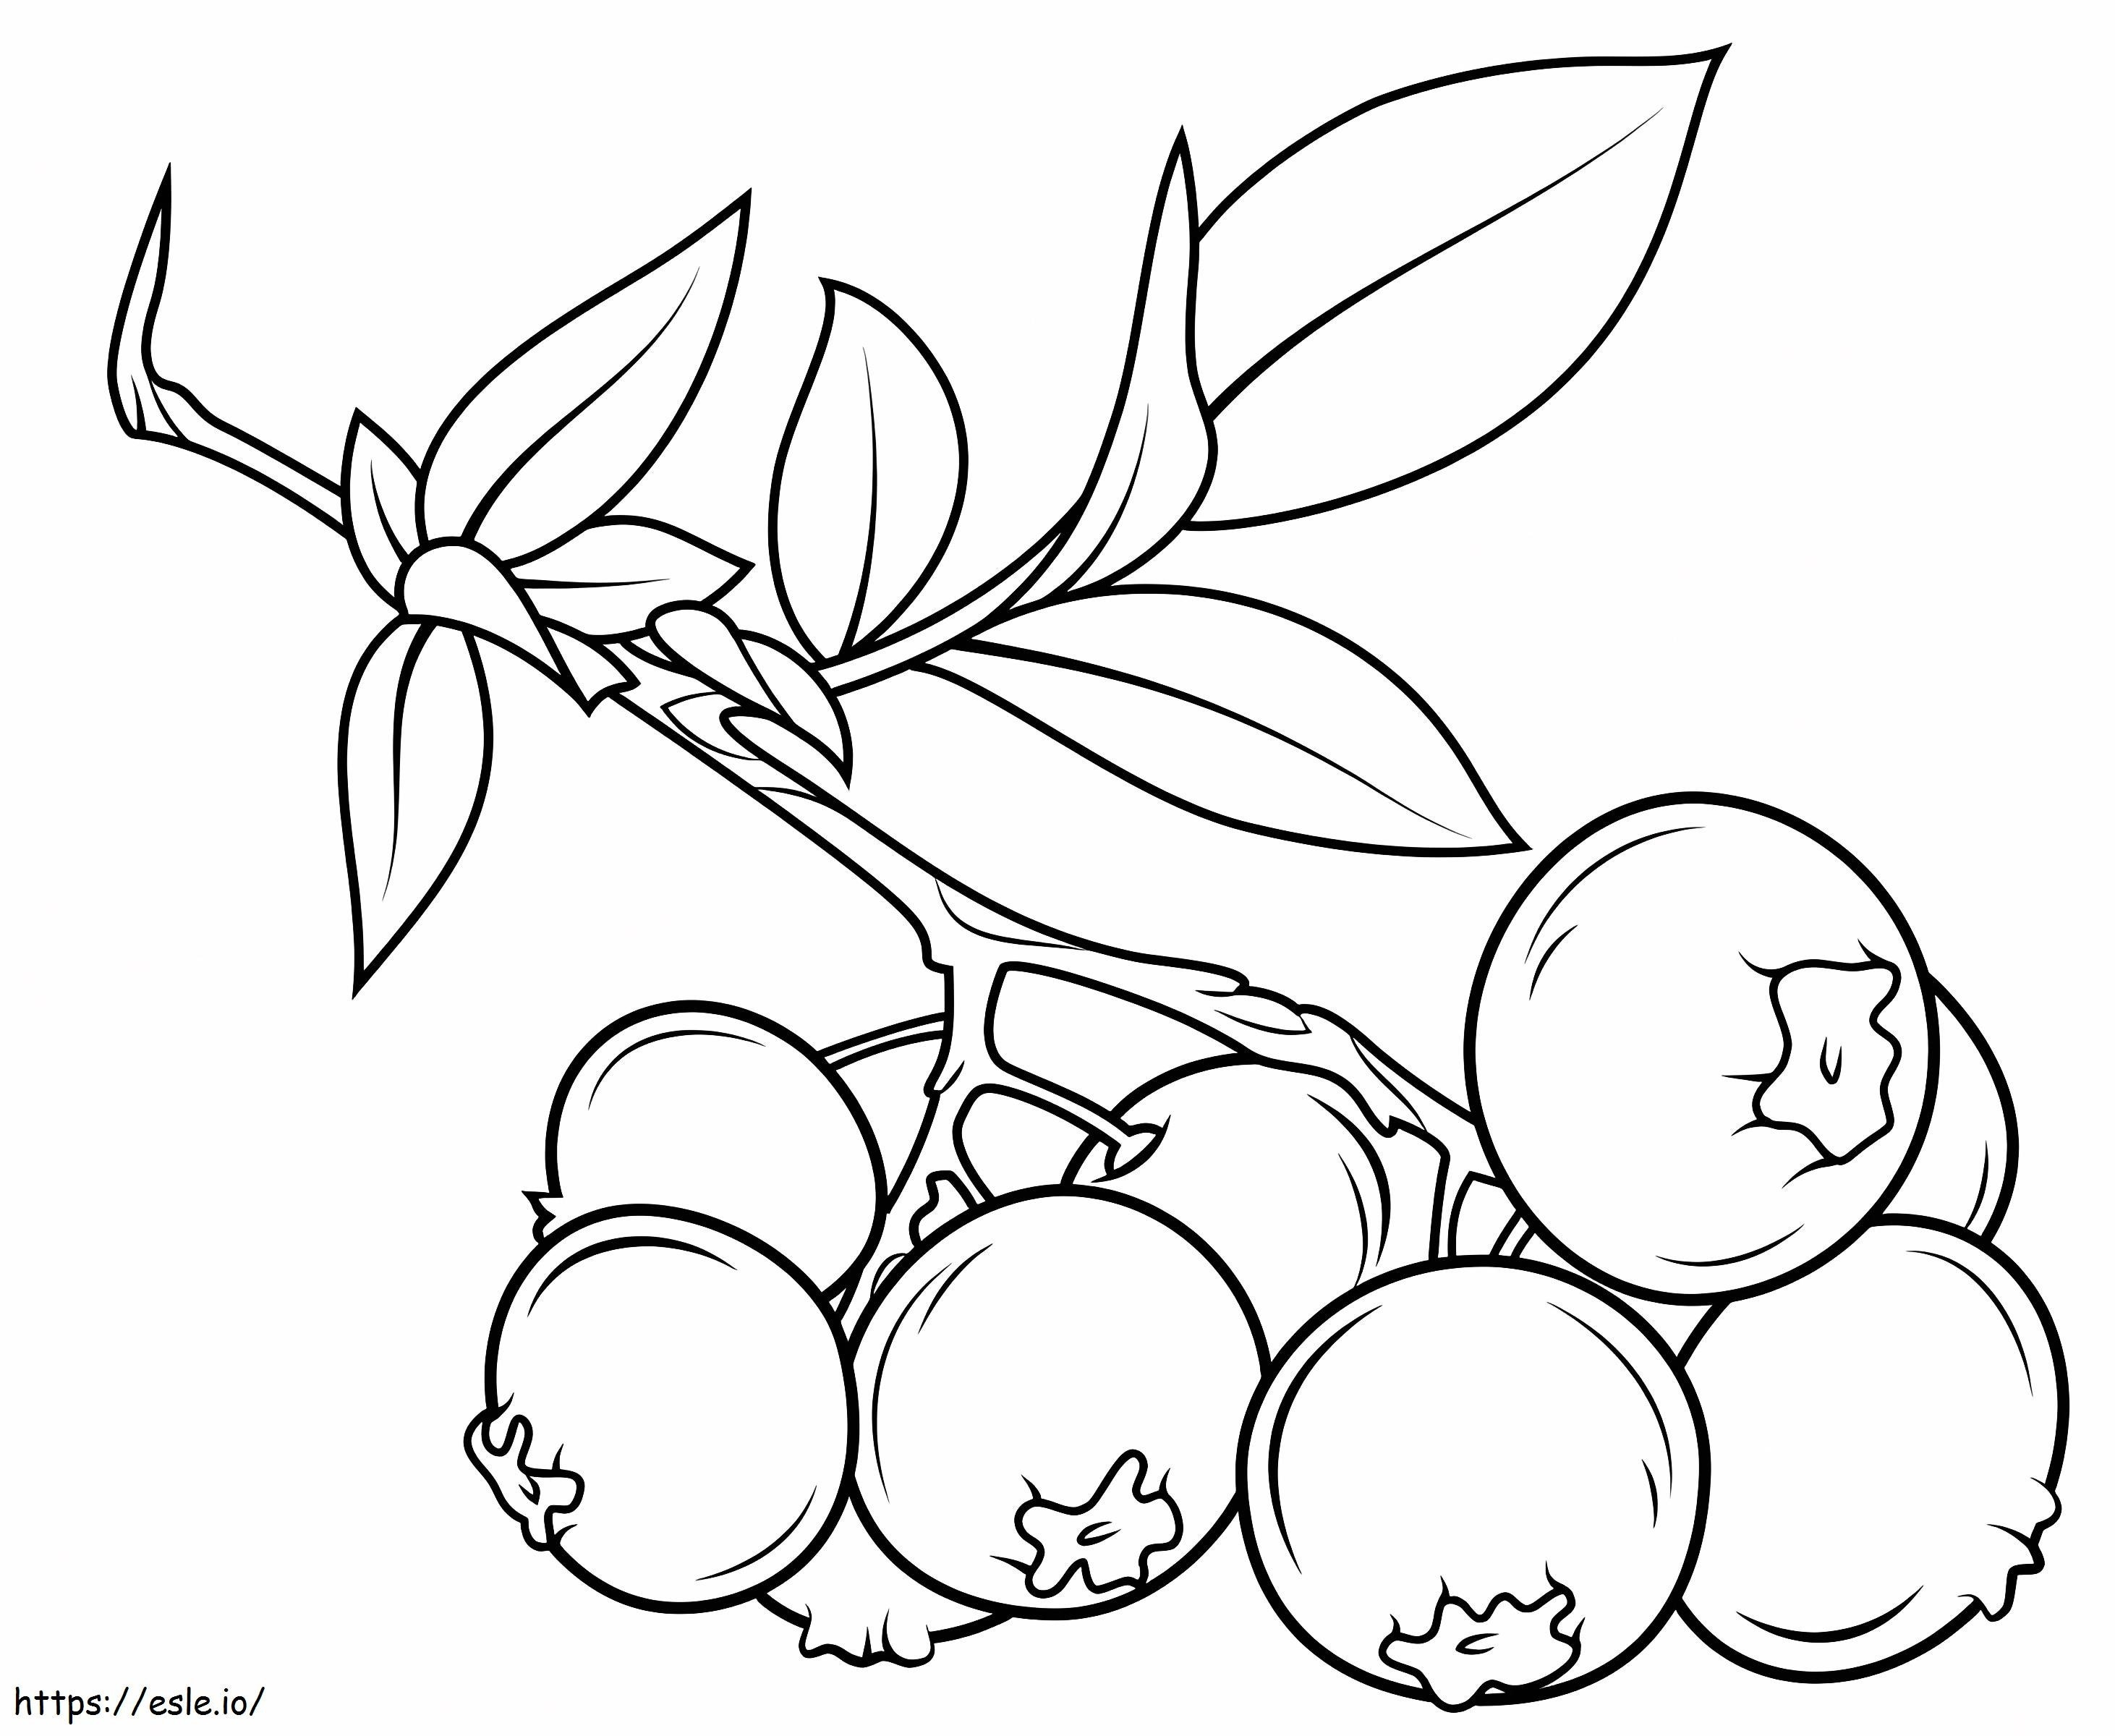 1559788199 Blueberry Branch A4 coloring page